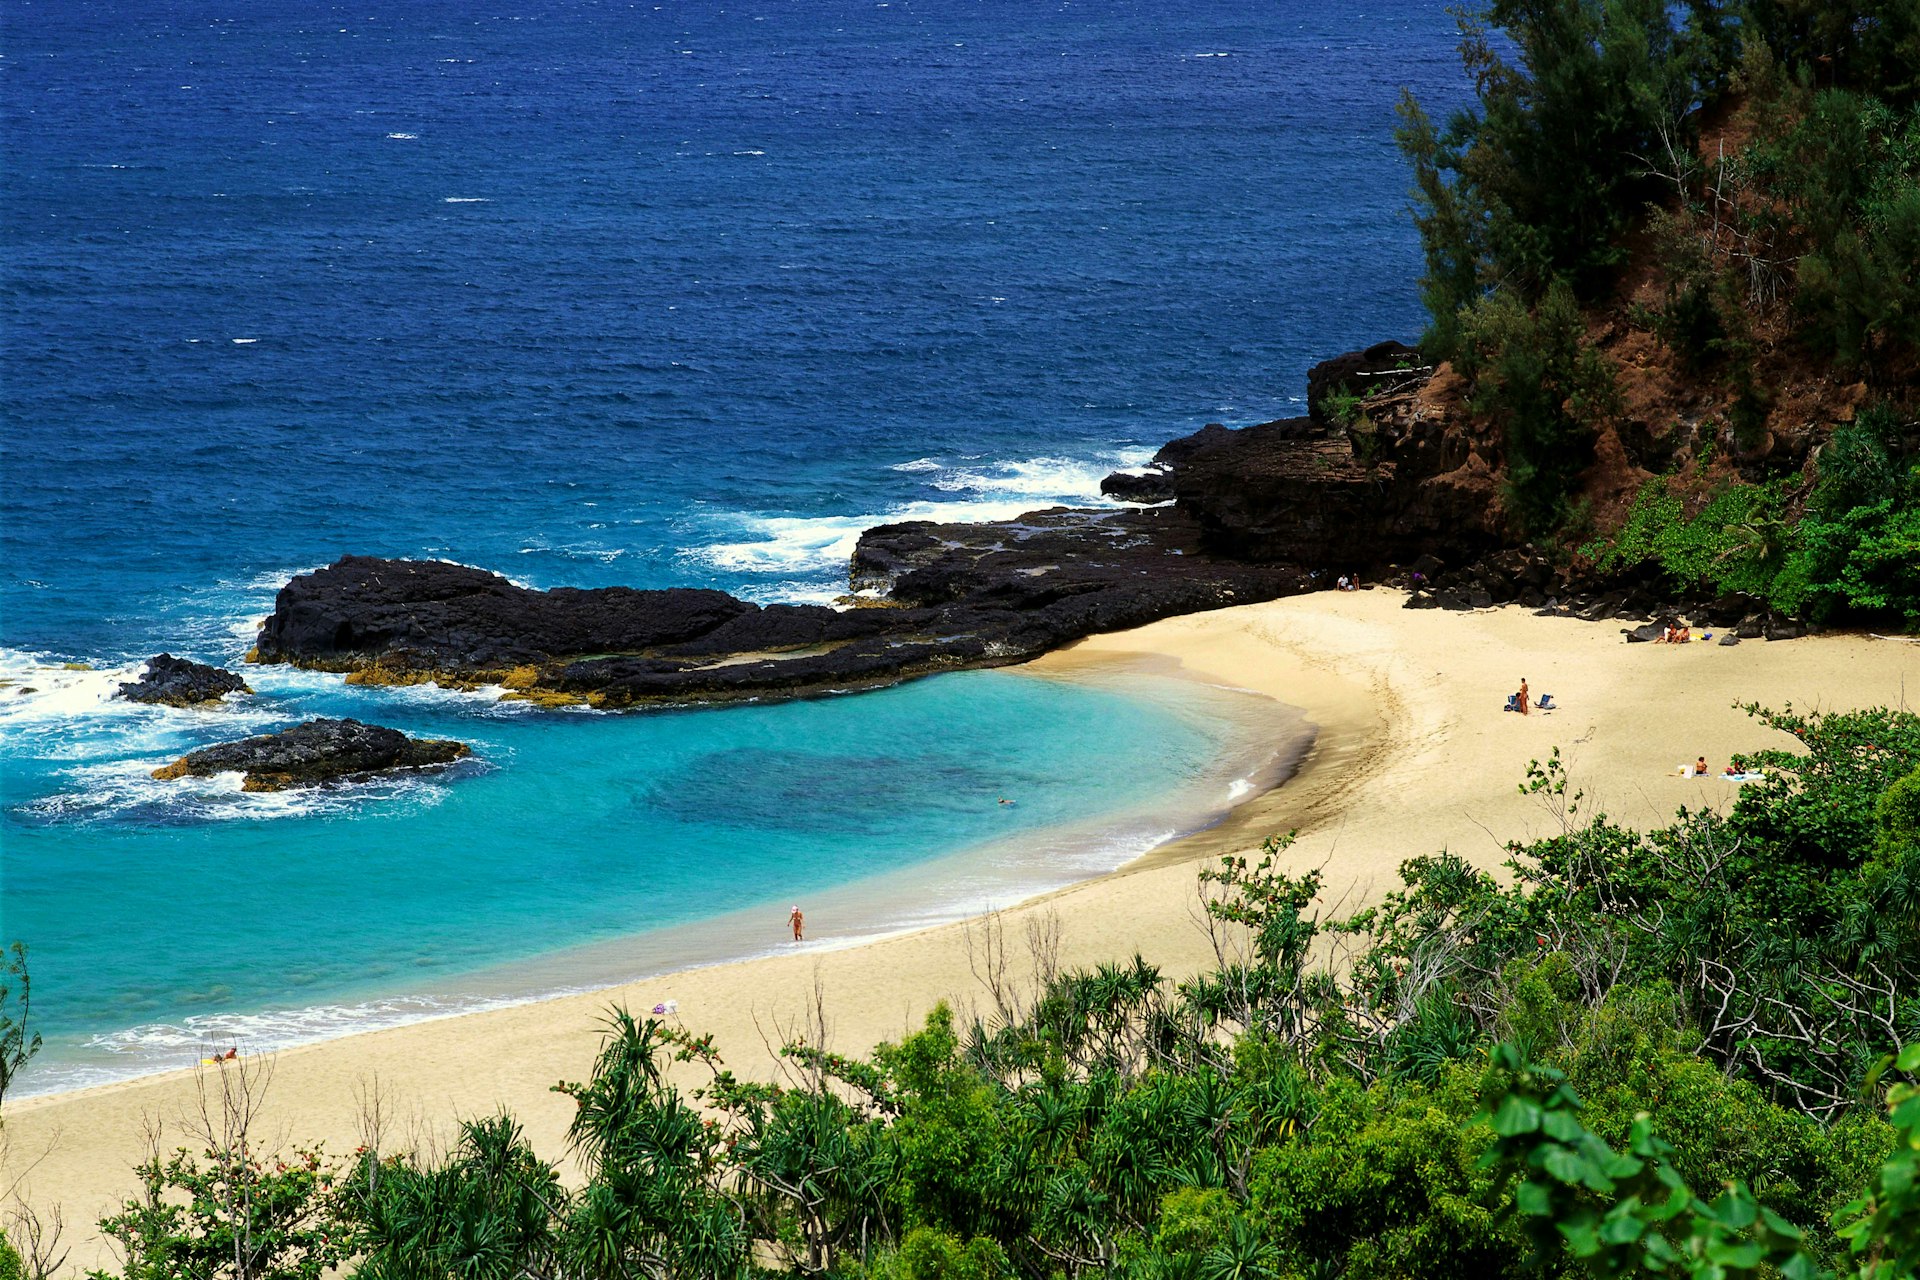 Lumahaʻi Beach, where scenes from South Pacific were filmed. Image by Vaughn Greg / Getty